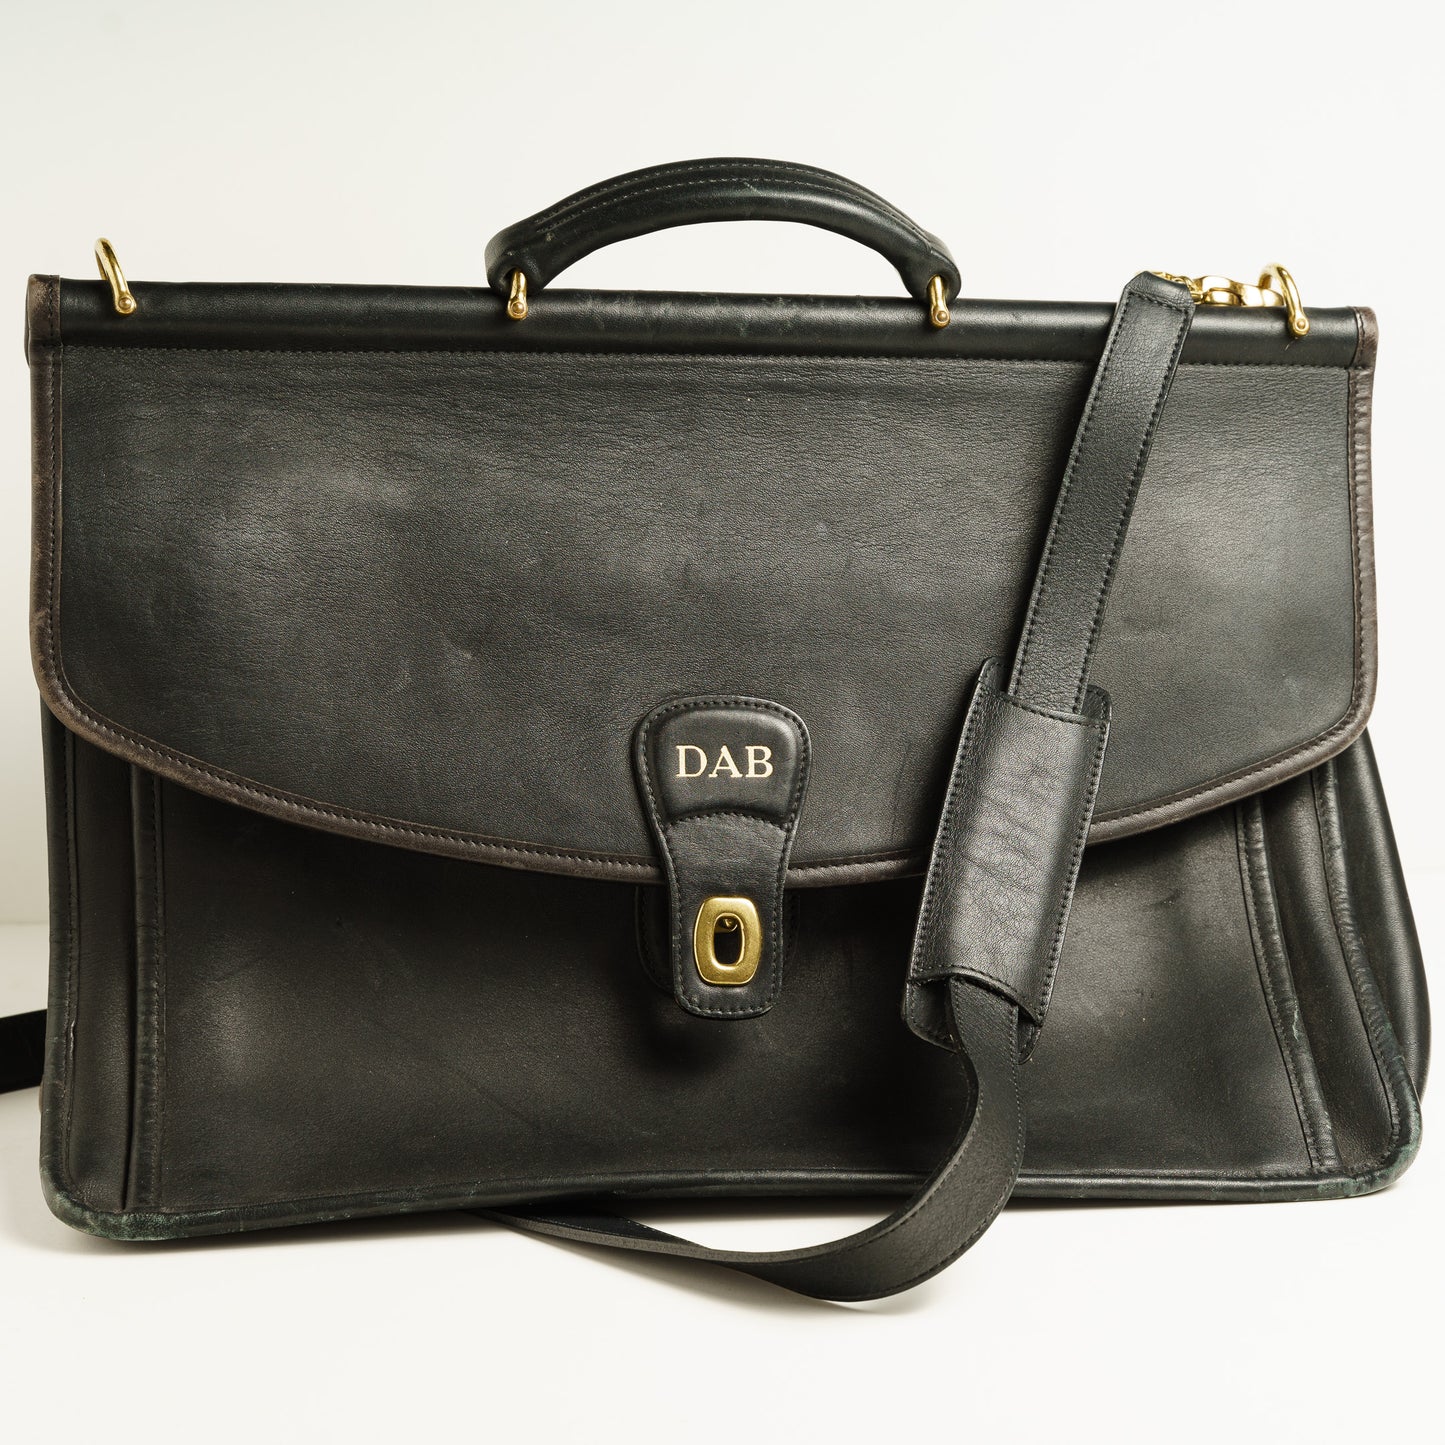 Leather Coach Briefcase - Monogrammed